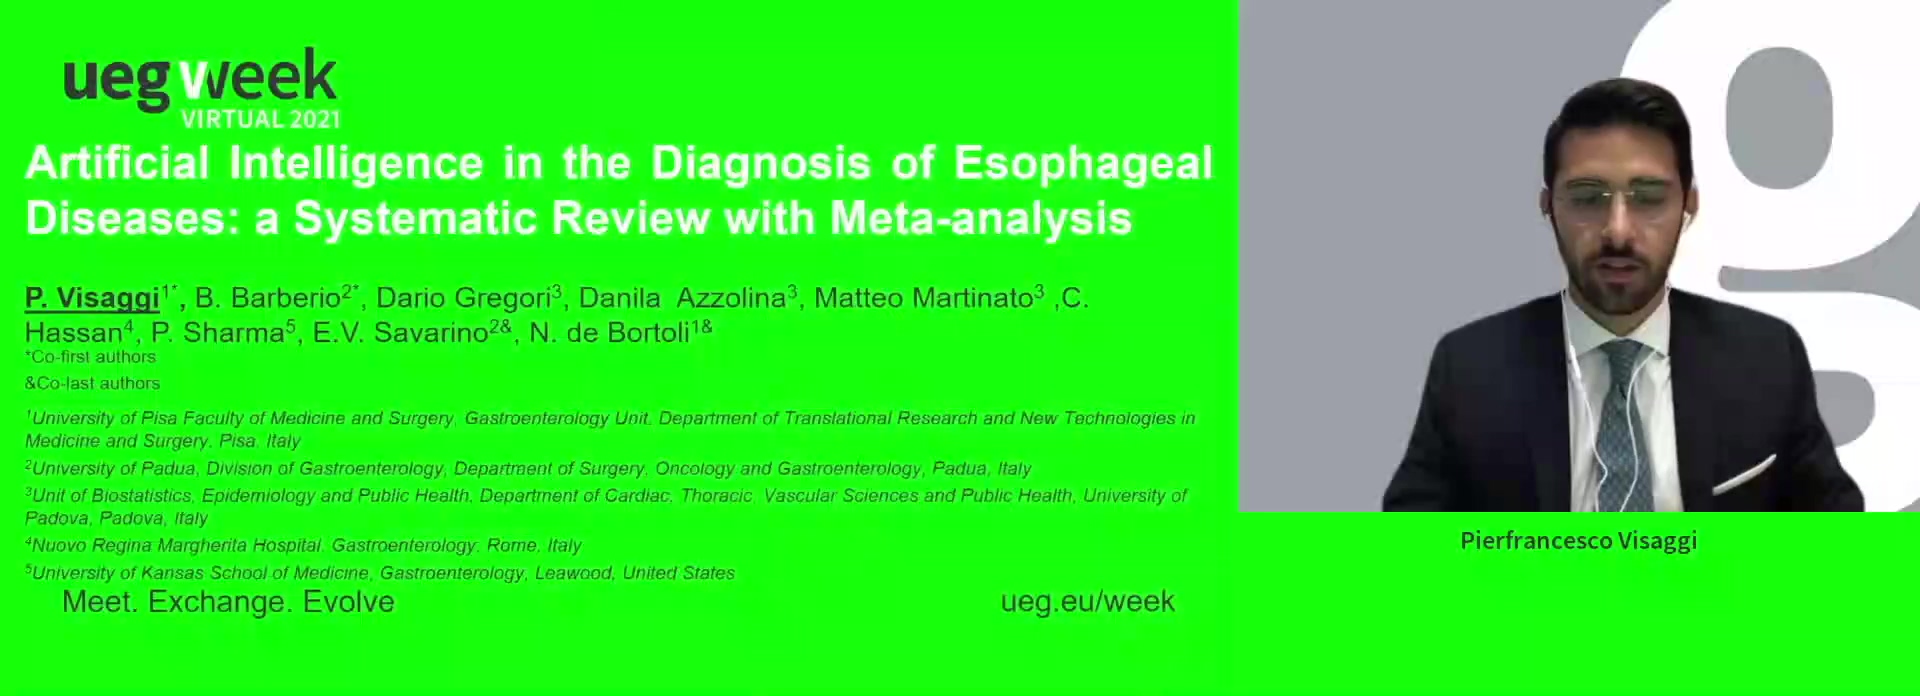 ARTIFICIAL INTELLIGENCE IN THE DIAGNOSIS OF ESOPHAGEAL DISEASES: A SYSTEMATIC REVIEW WITH META-ANALYSIS